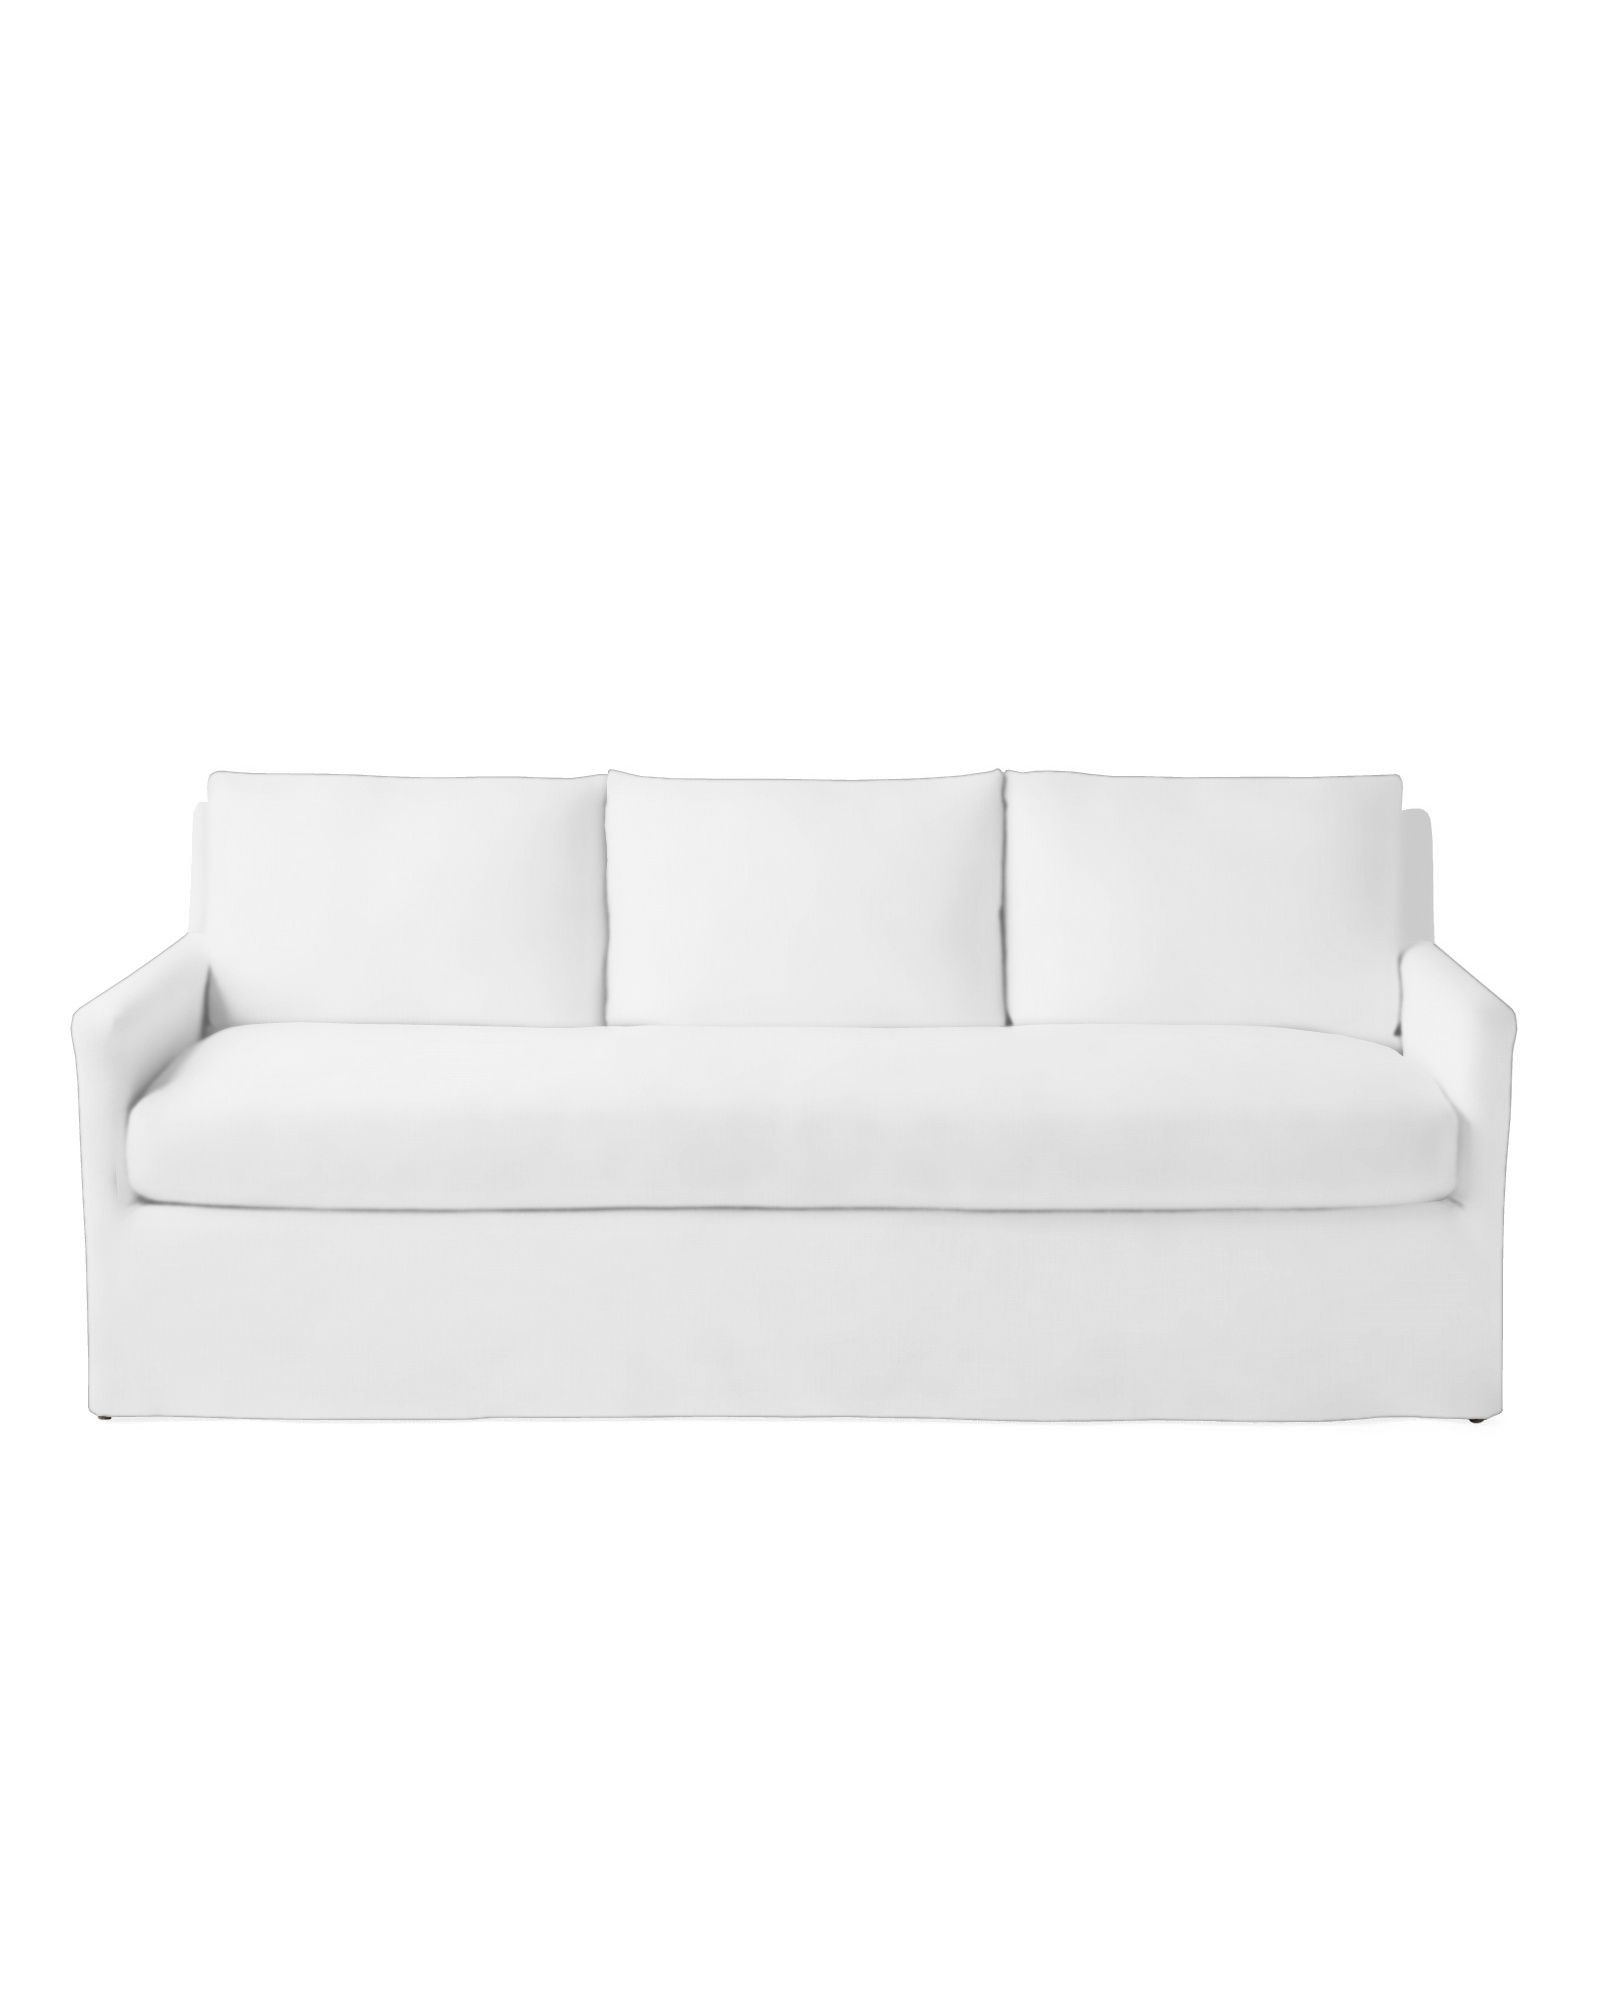 Spruce Street Slipcovered Sofa with Bench Seat | Serena and Lily